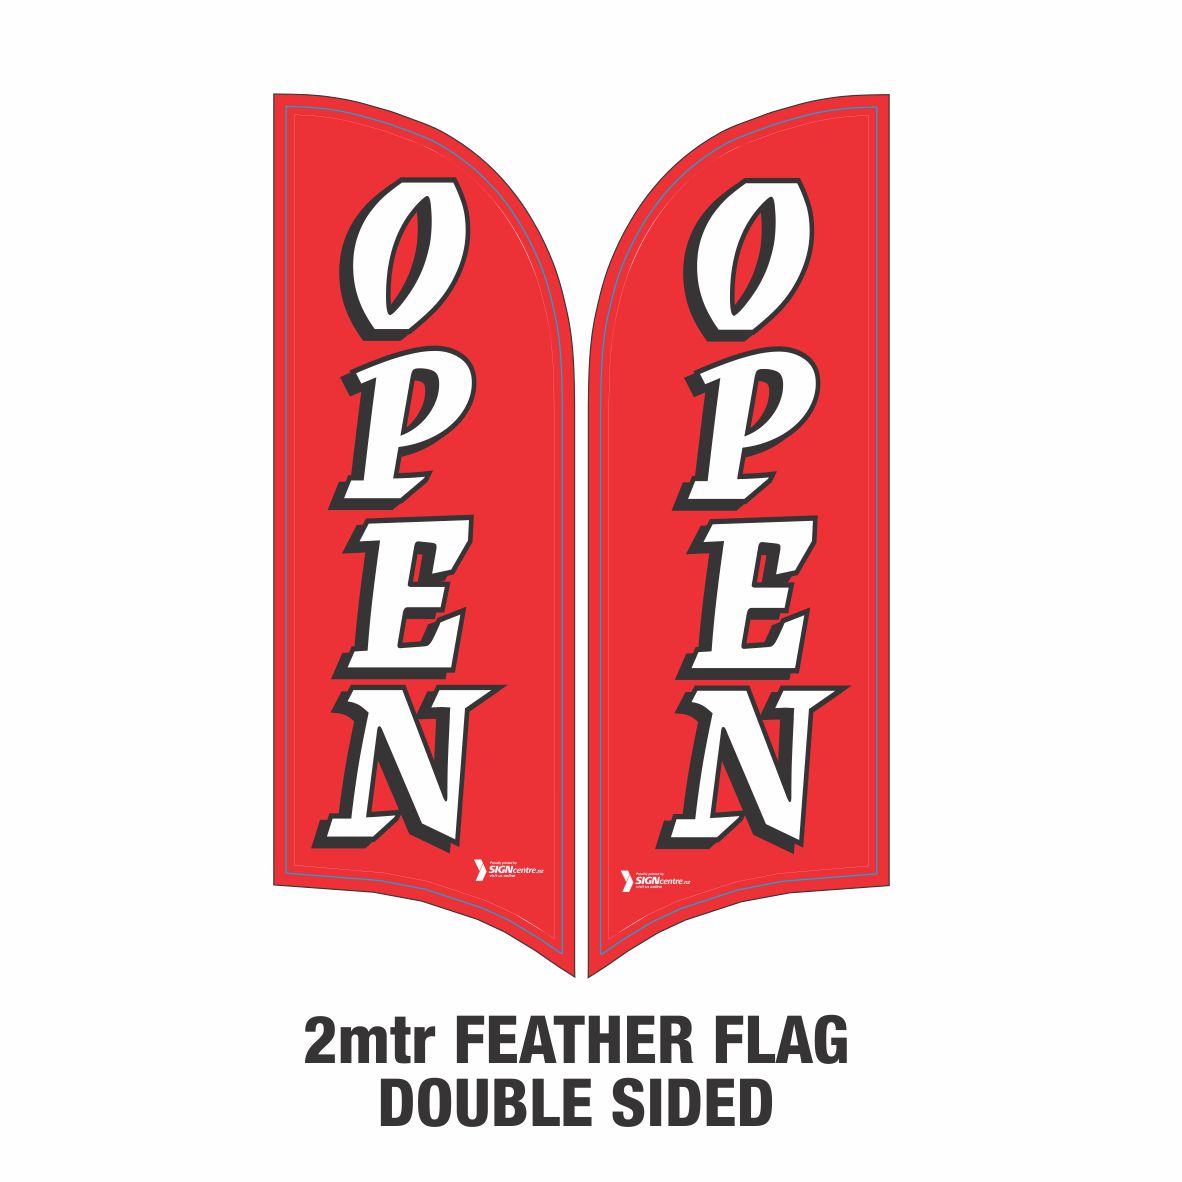 OPEN-FEATHER-FLAG-BANNER-2MTR-double-SIDED-SIGN-CENTRE-TAURANGA